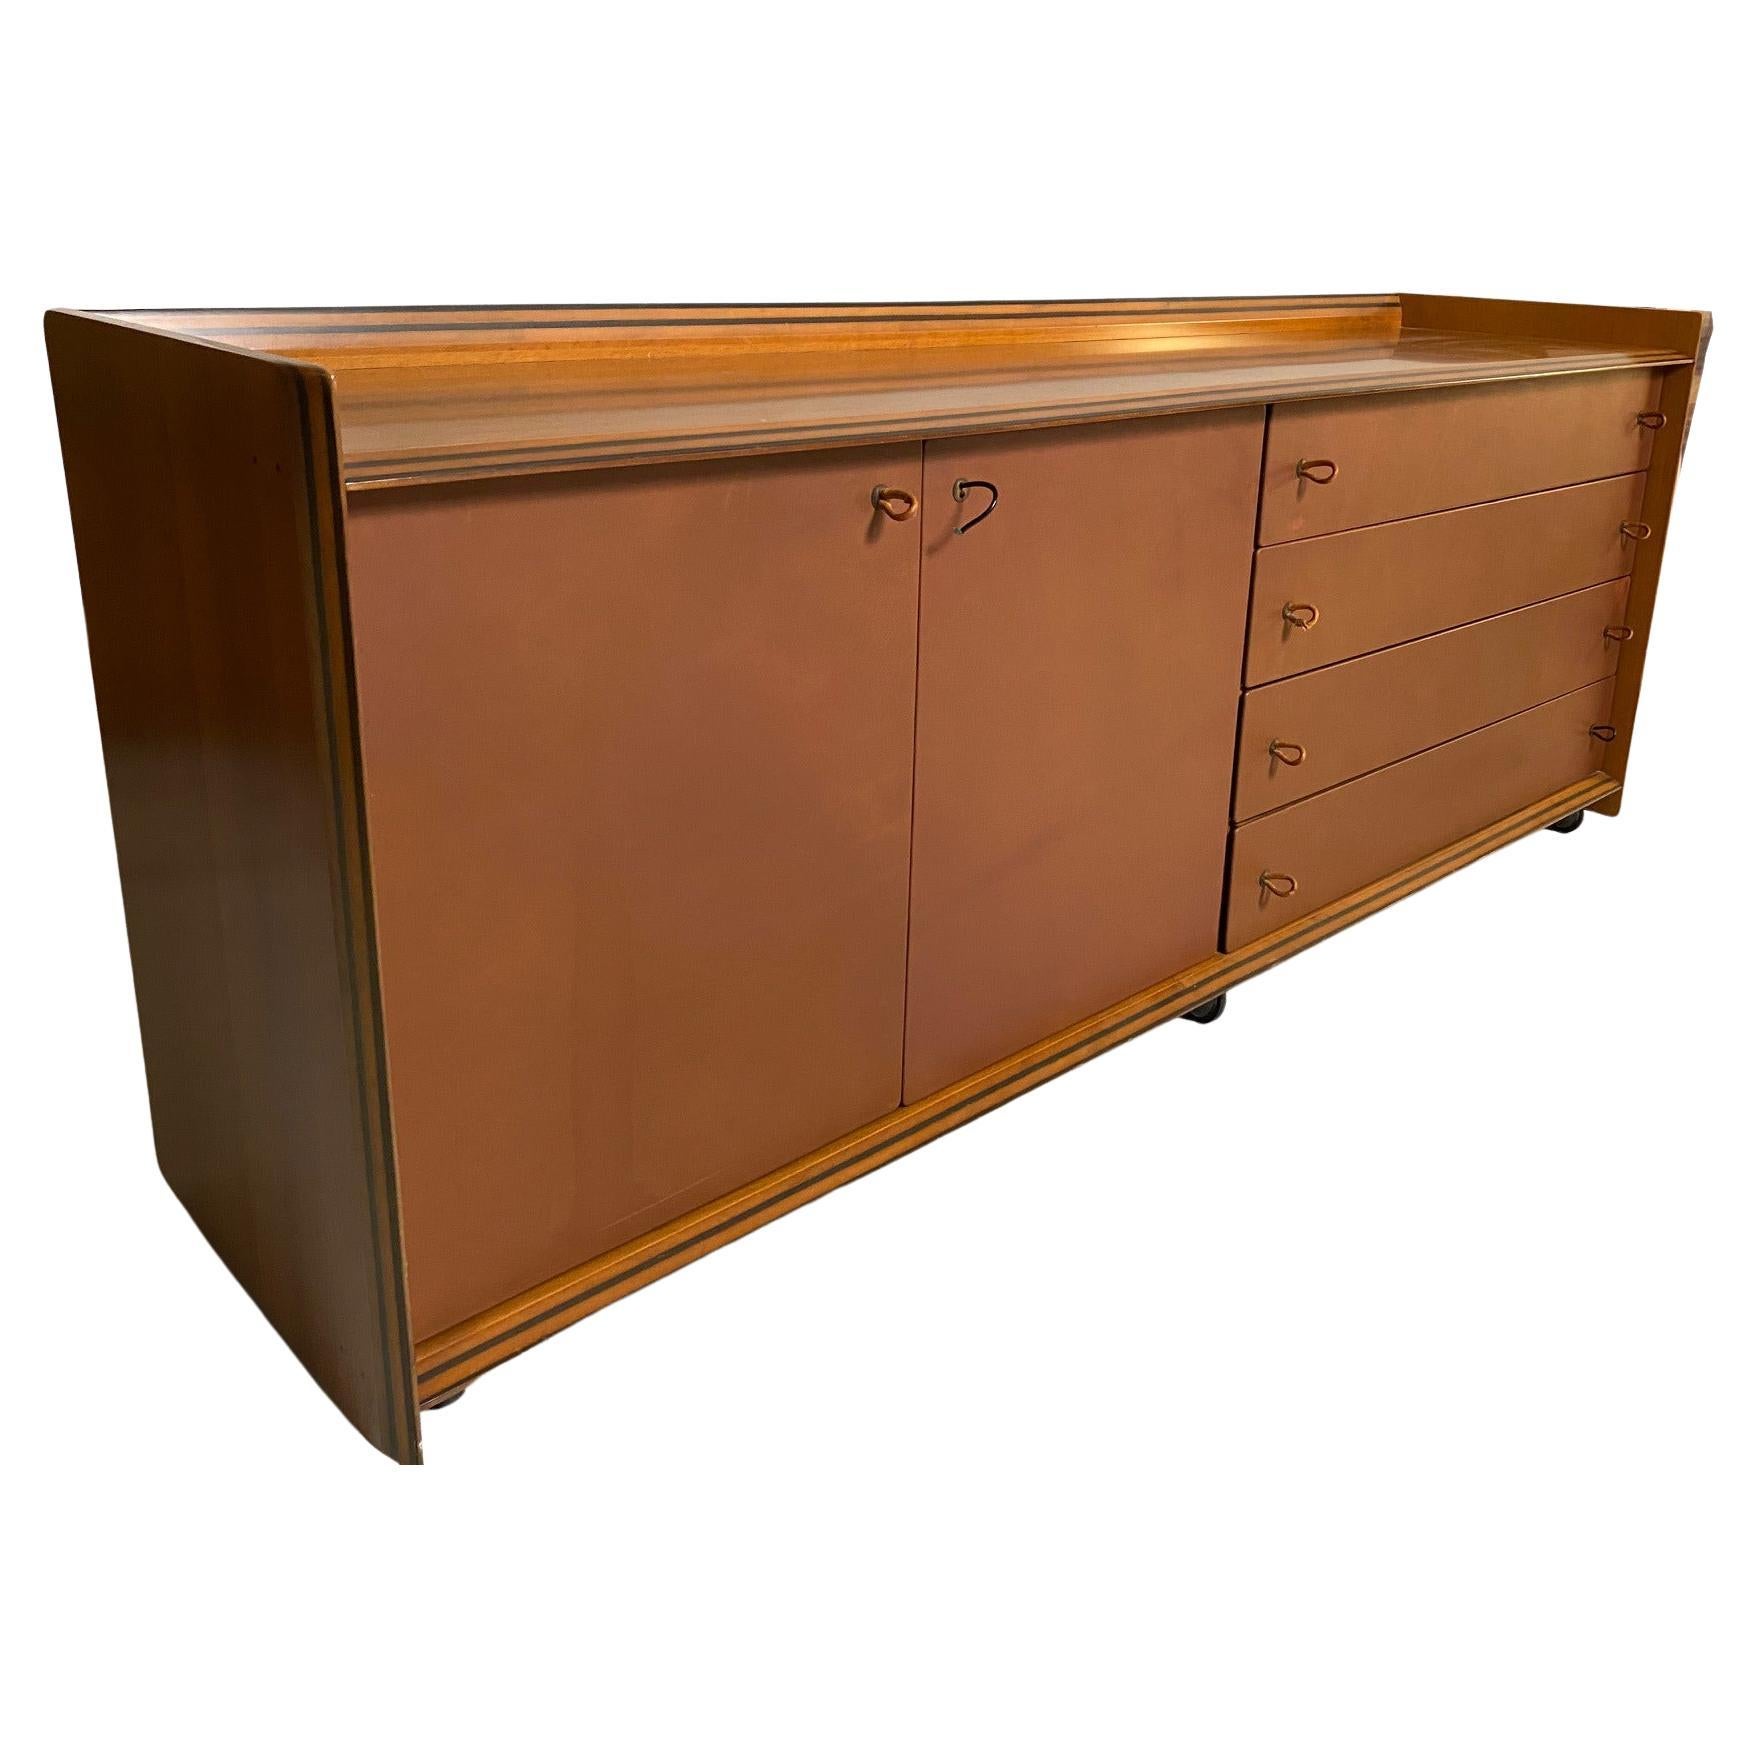 Afra & Tobia Scarpa, sideboard model 'Artona', walnut, leather, Italy, circa 1975.

 This sideboard with leather front is designed as part of the Artona line by The Artona line by Afra and Tobia Scarpa was the first line ever produced by Maxalto,